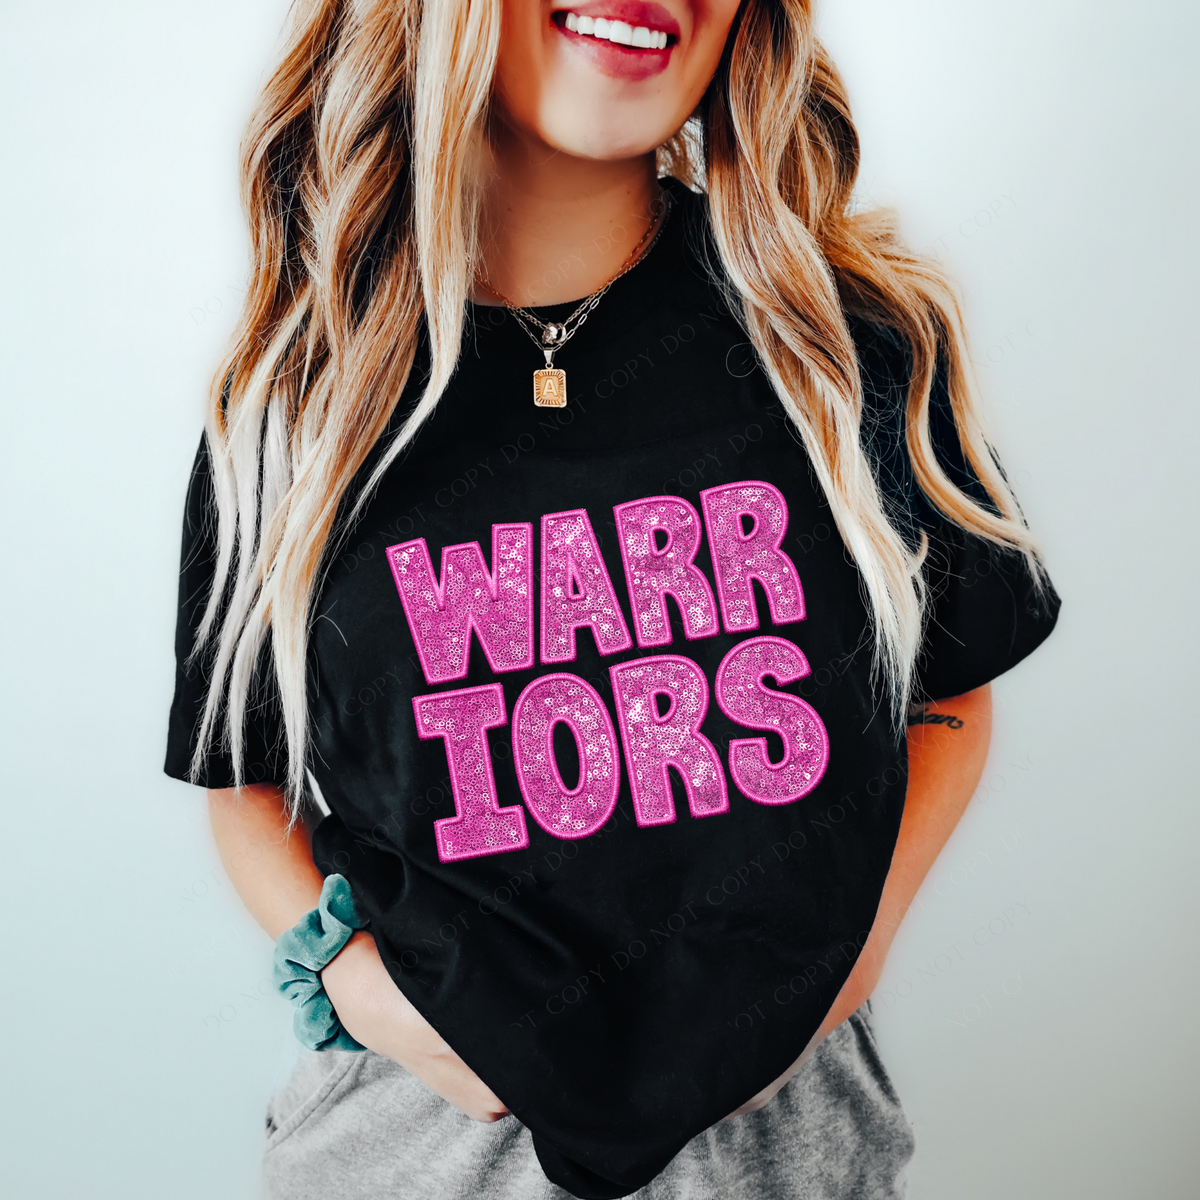 Warriors Embroidery & Sequin in Pink Mascot Digital Design, PNG